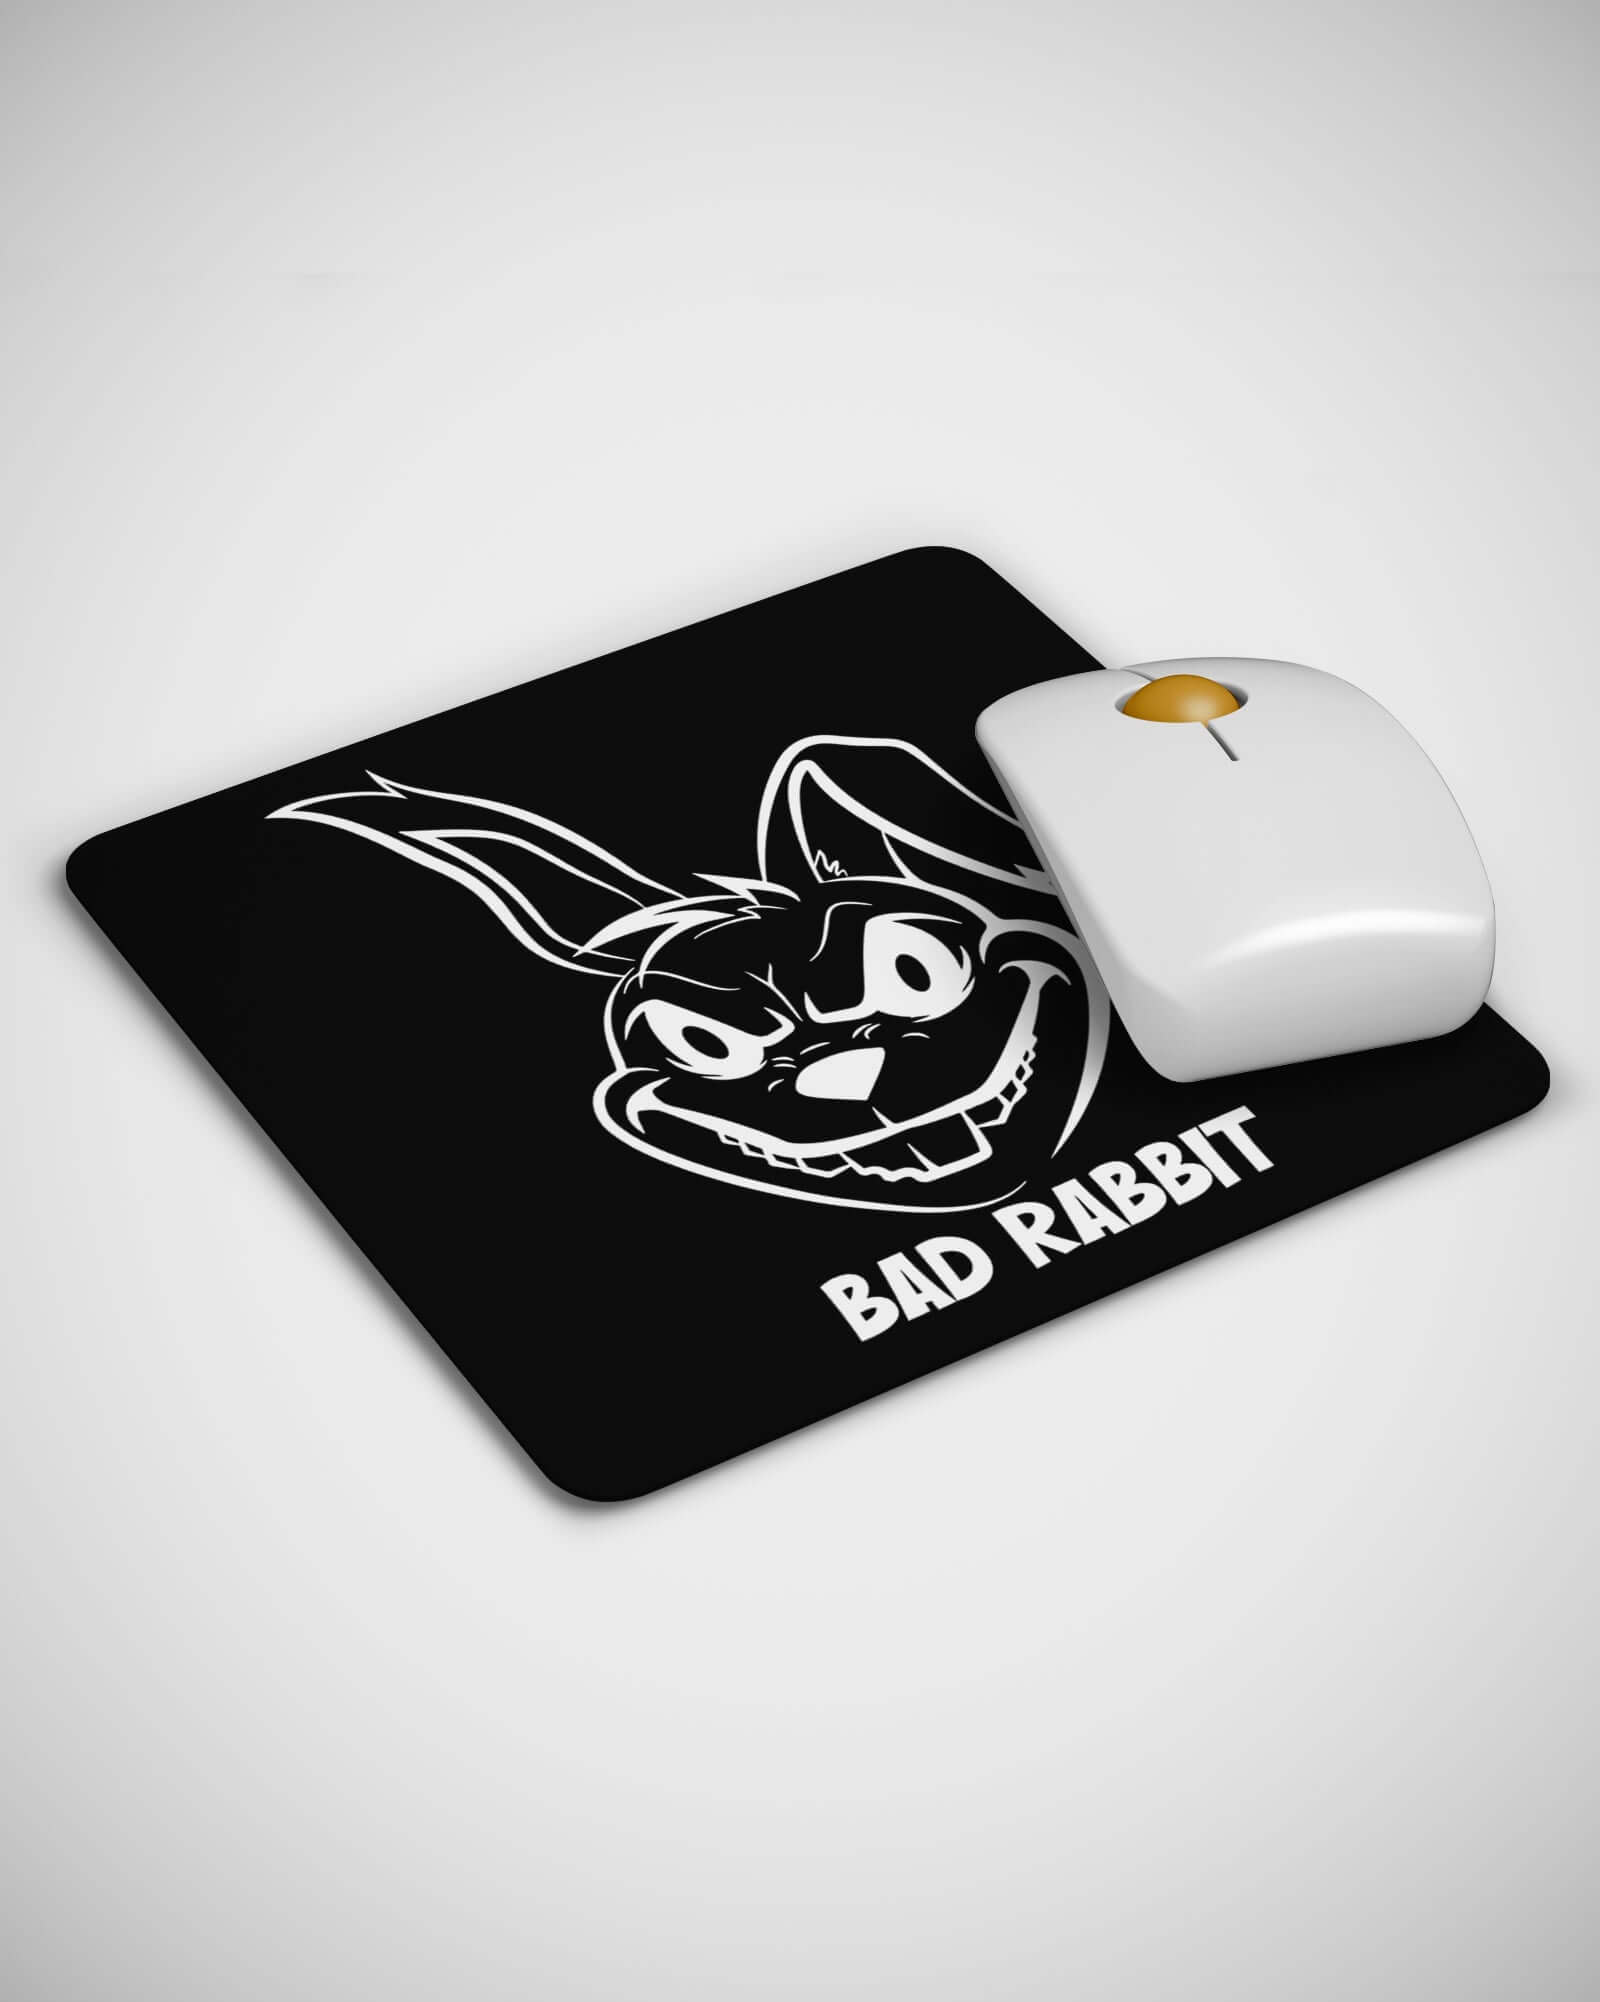 Bad Rabbit Cool Funny Gift Mouse pad